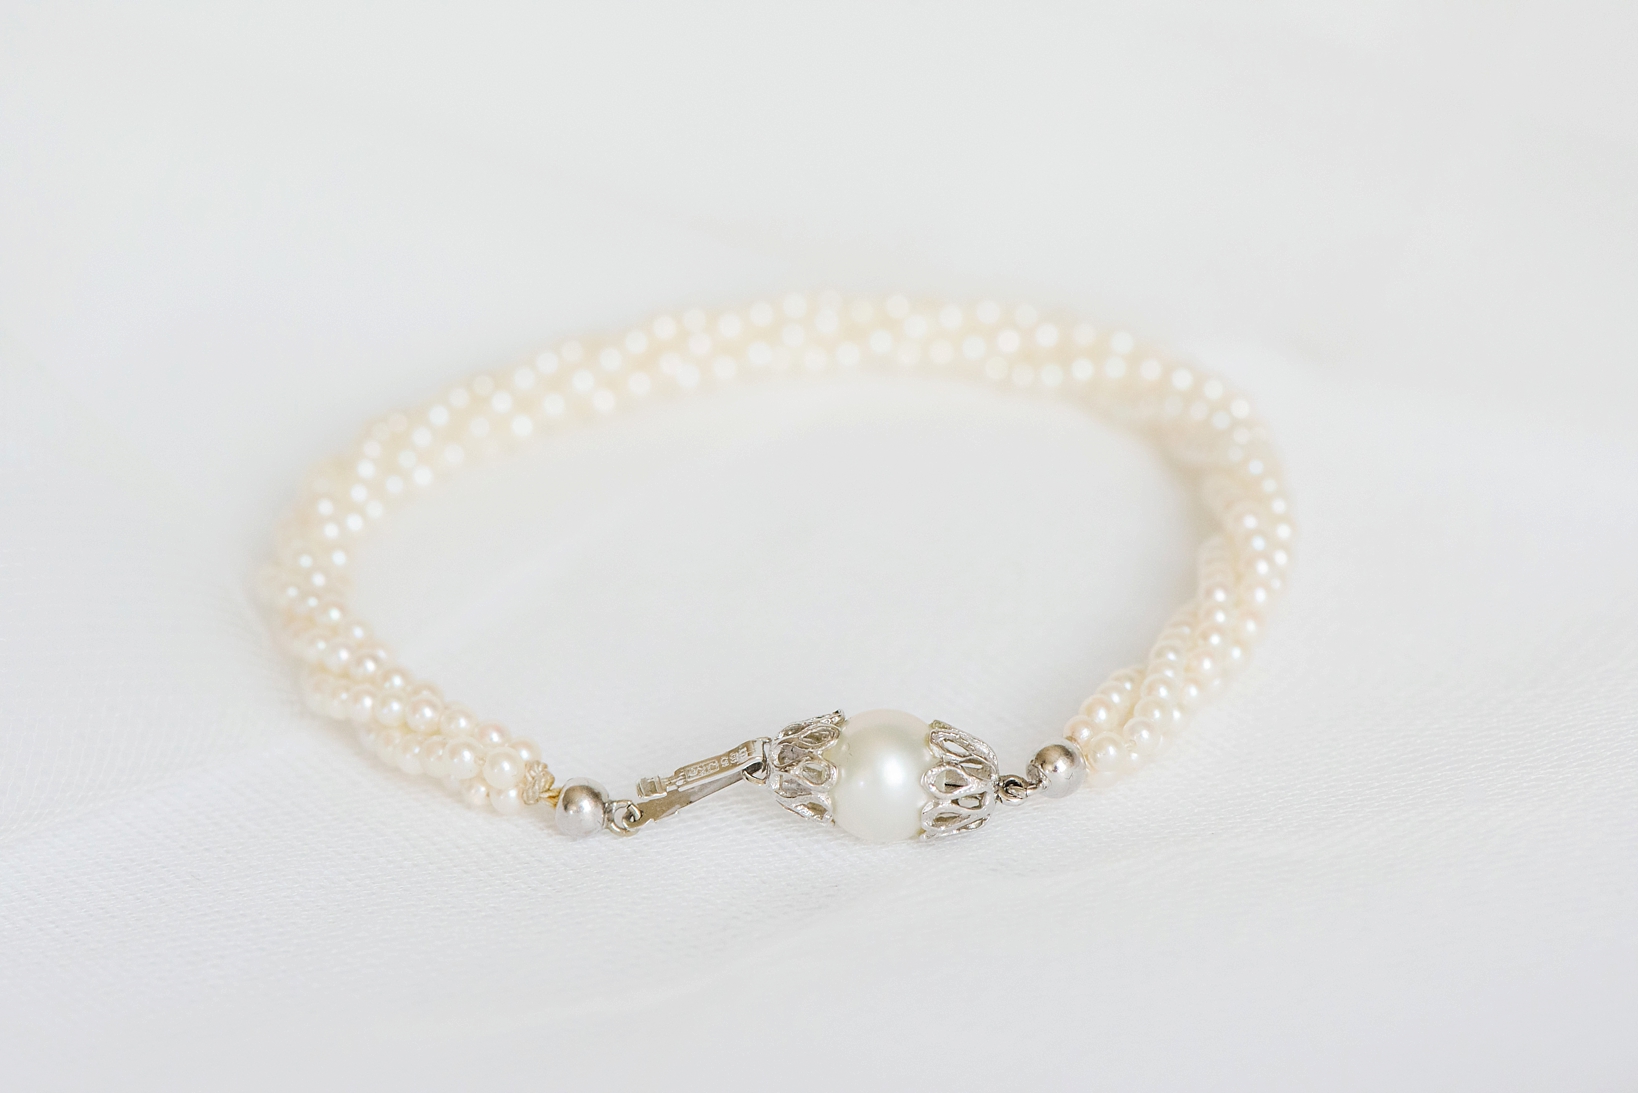 Vintage pearl bracelet with silver clasps